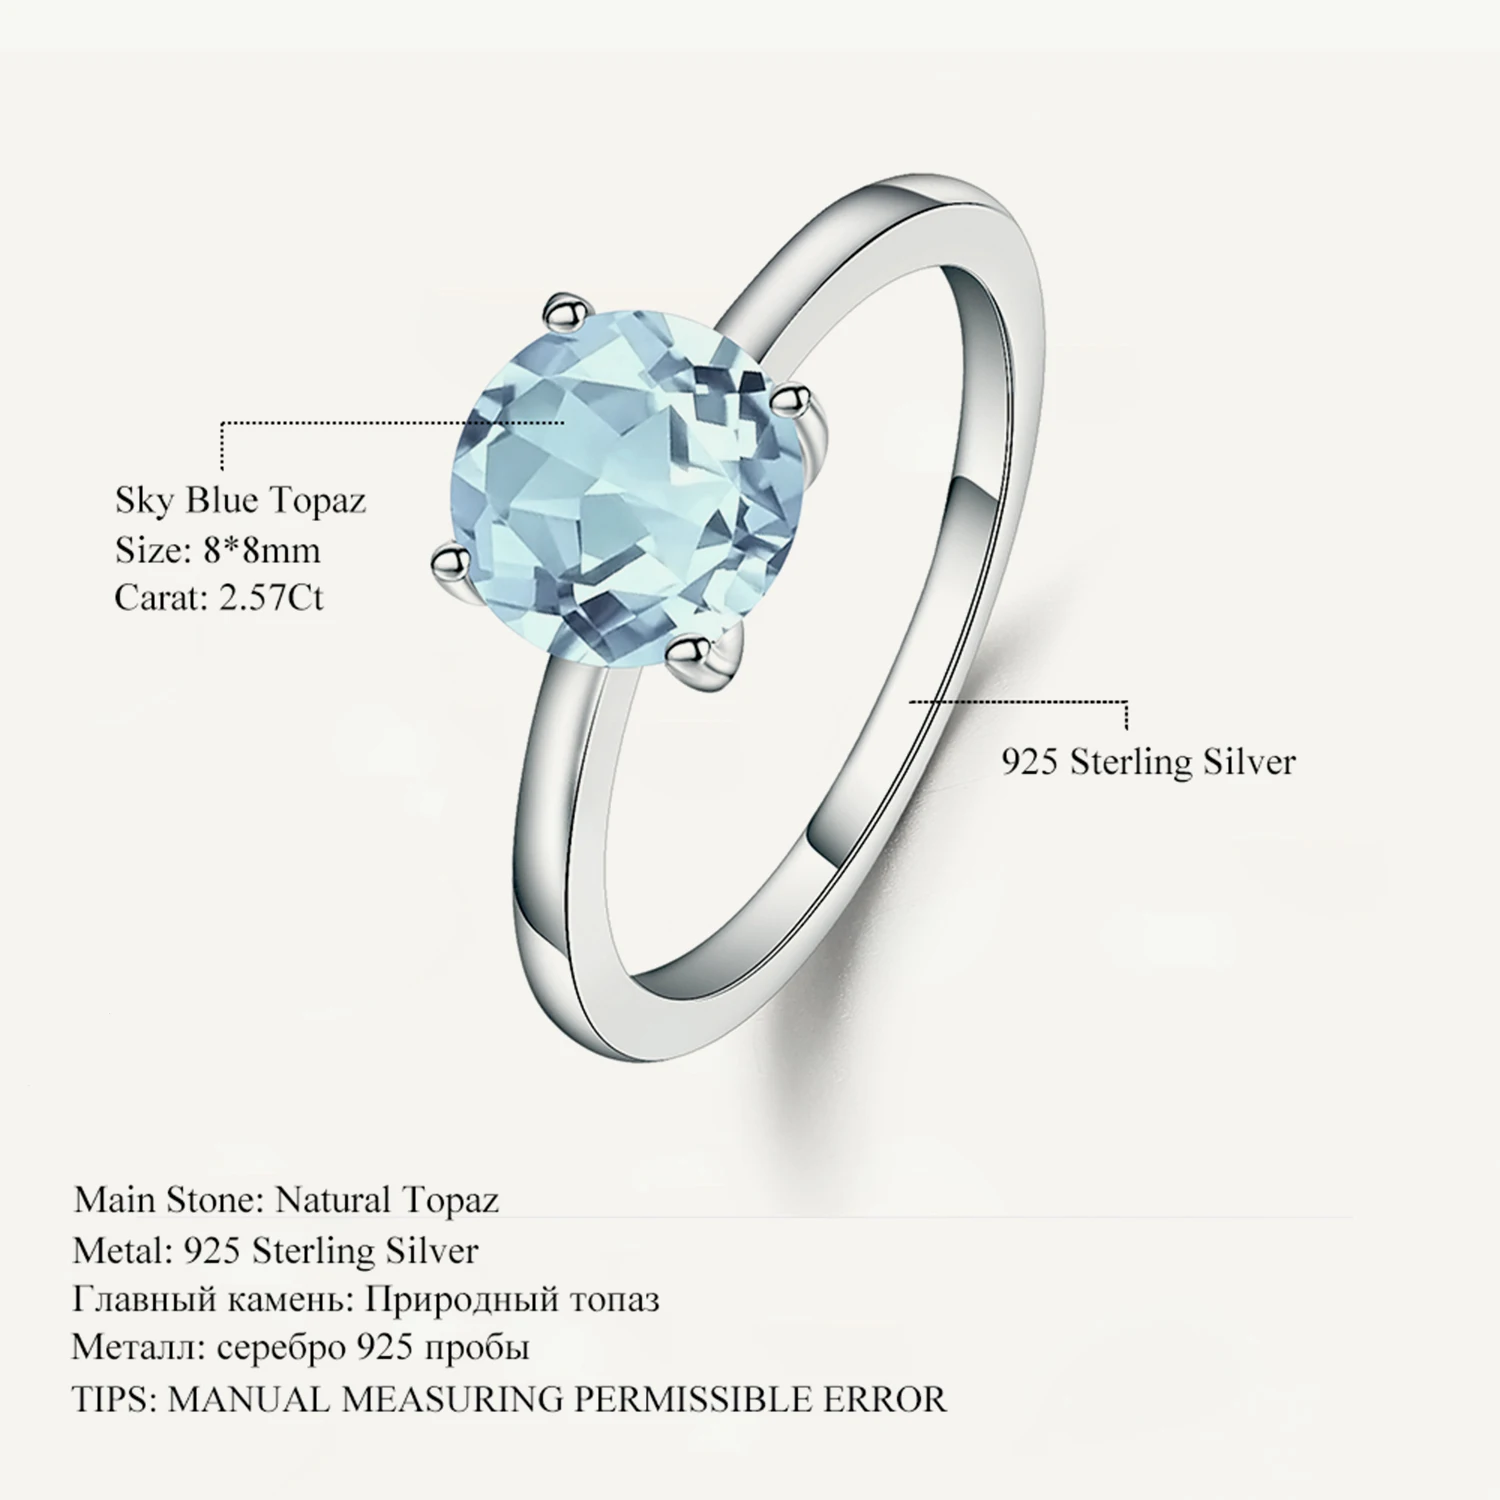 

Gem's Ballet 2.57Ct Natural Sky Blue Topaz Gemstone Offic Rings 925 Sterling Silver Round Ring For Women Gift Fine Jewelry